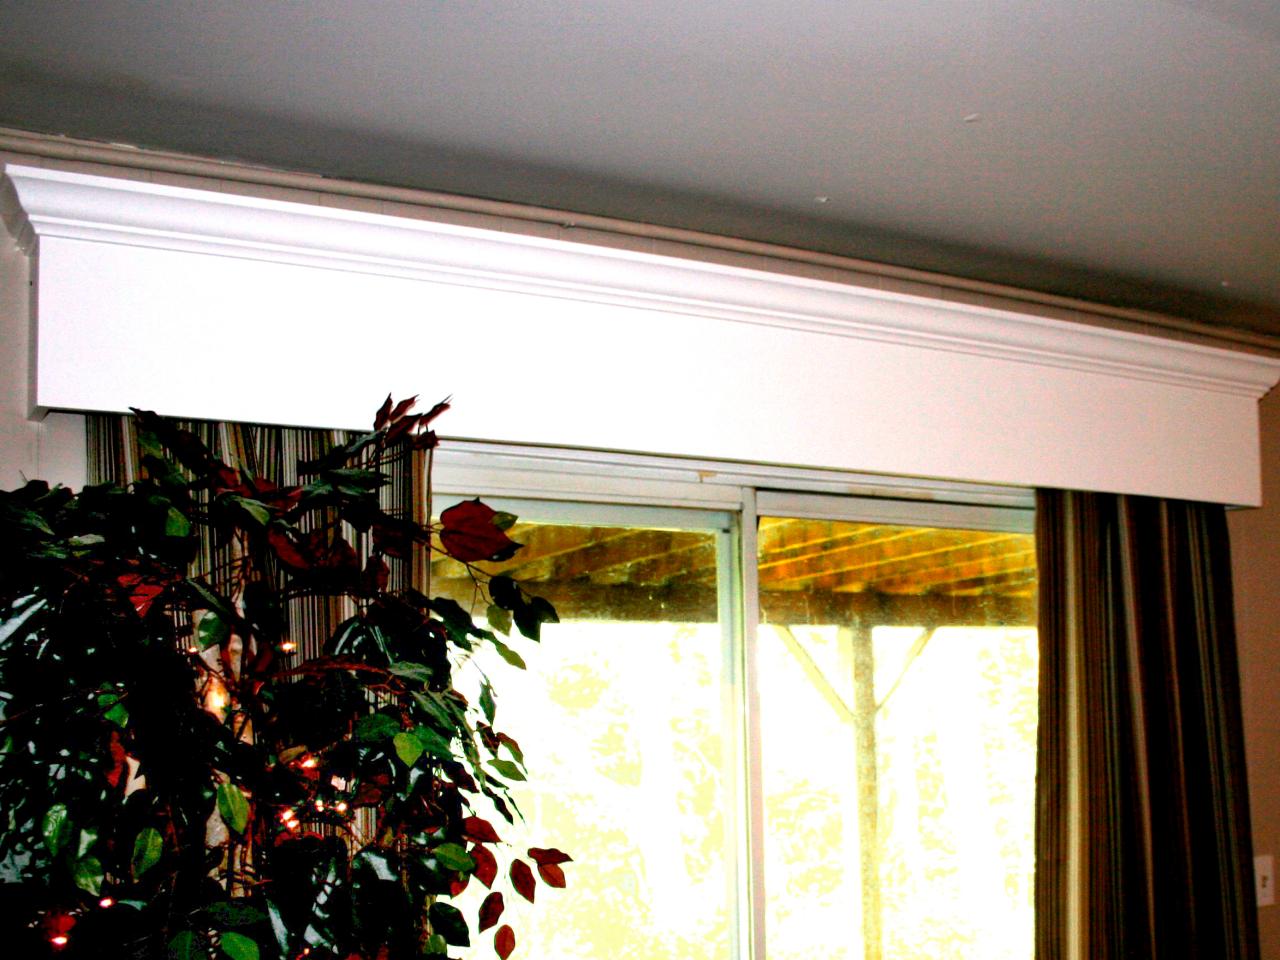 How To Build A Wooden Window Valance, Sliding Glass Door Valance Treatments